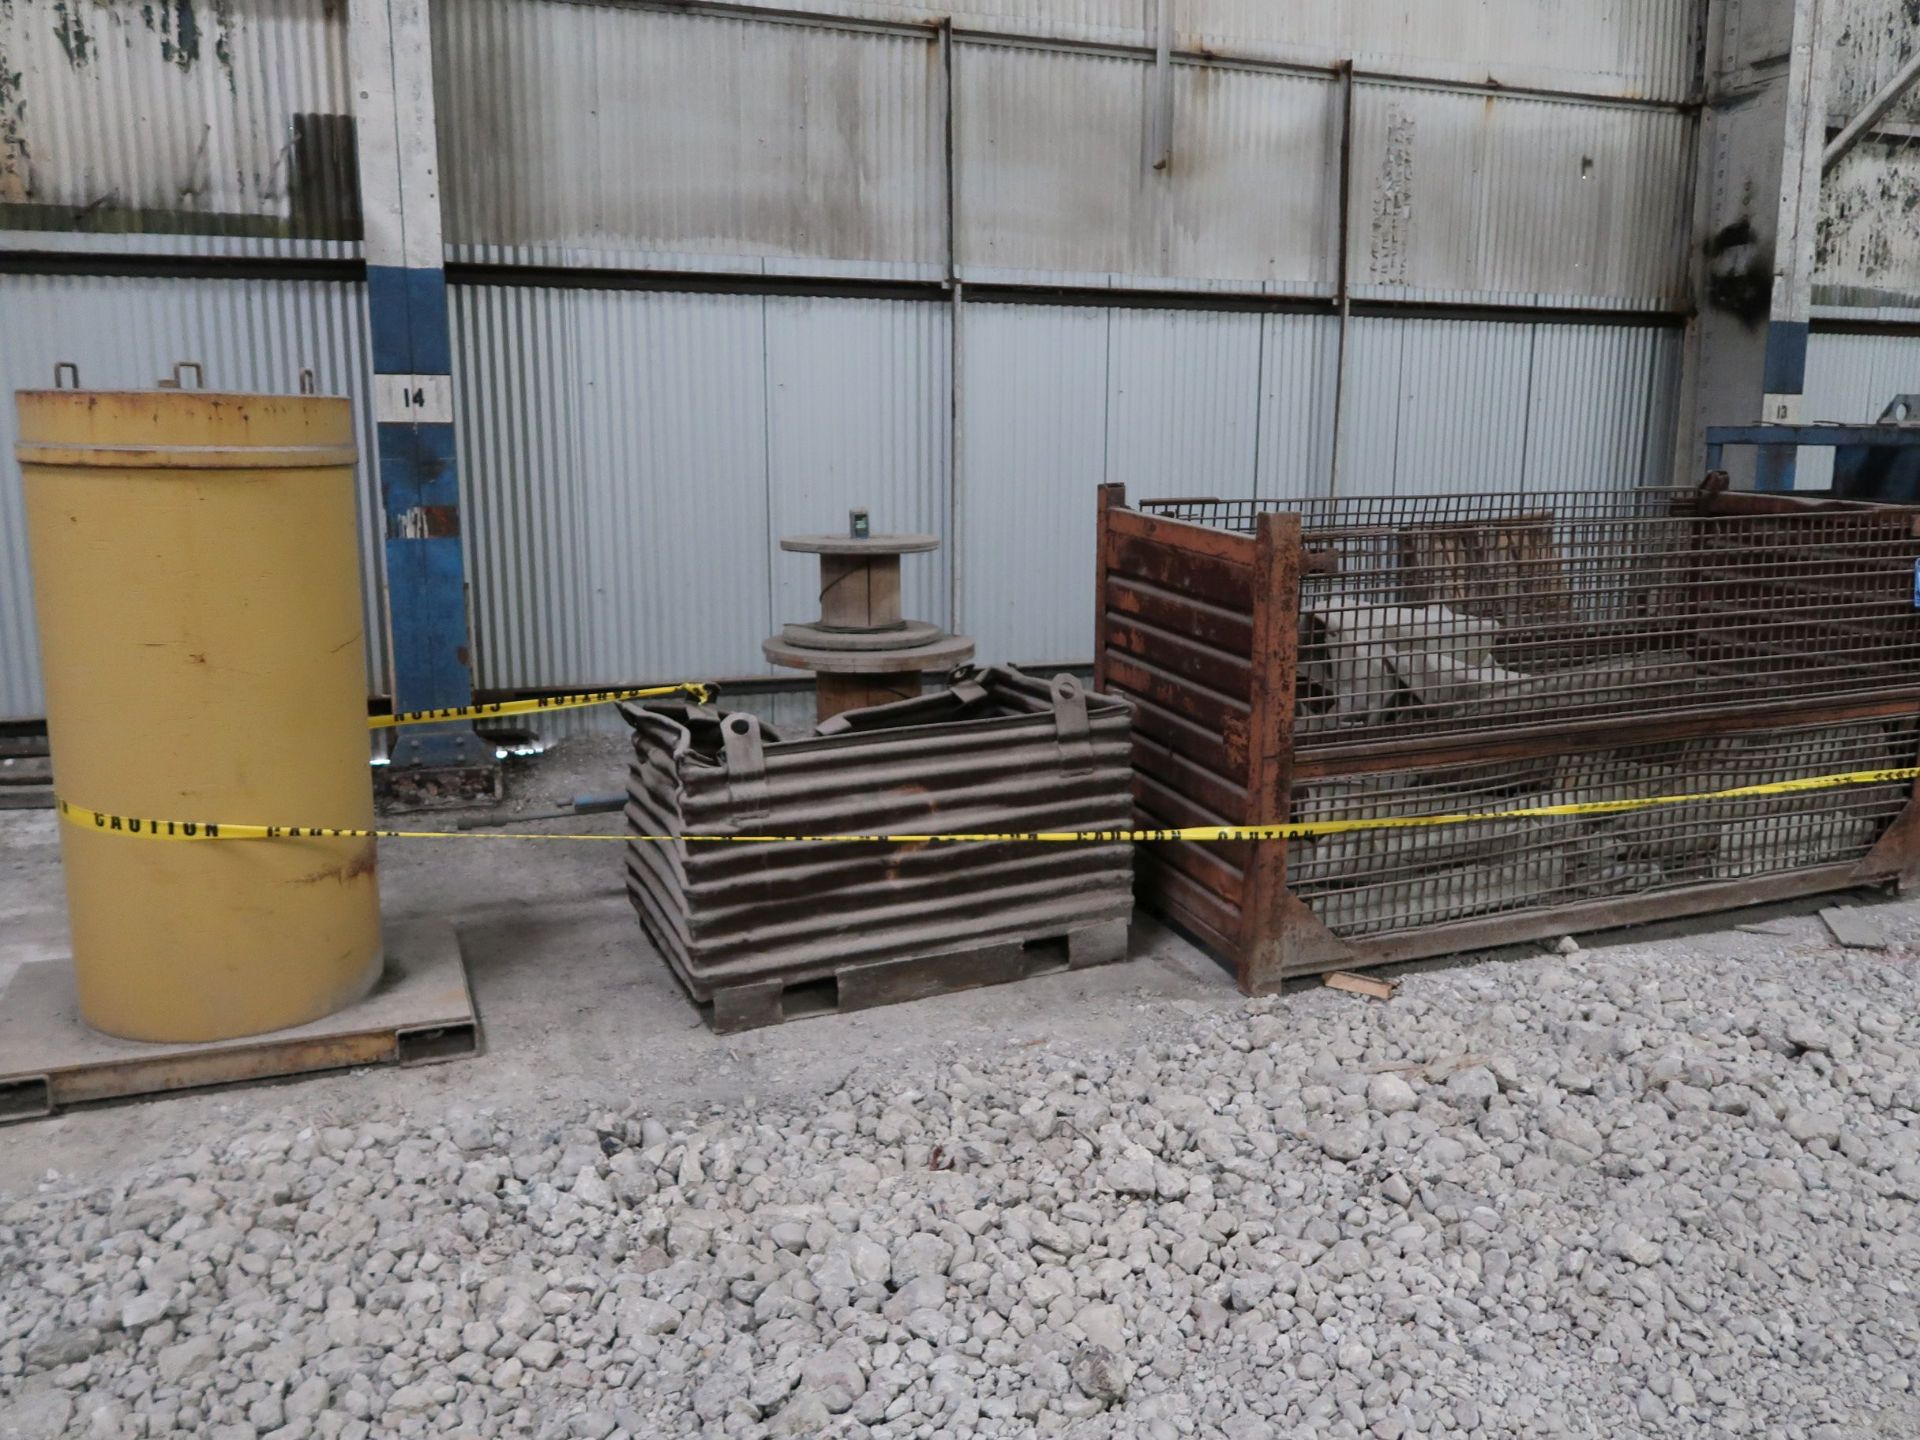 (LOT) STEEL CAGE, LARGE BASKETS, STEEL TOTE, YELLOW CYLINDER